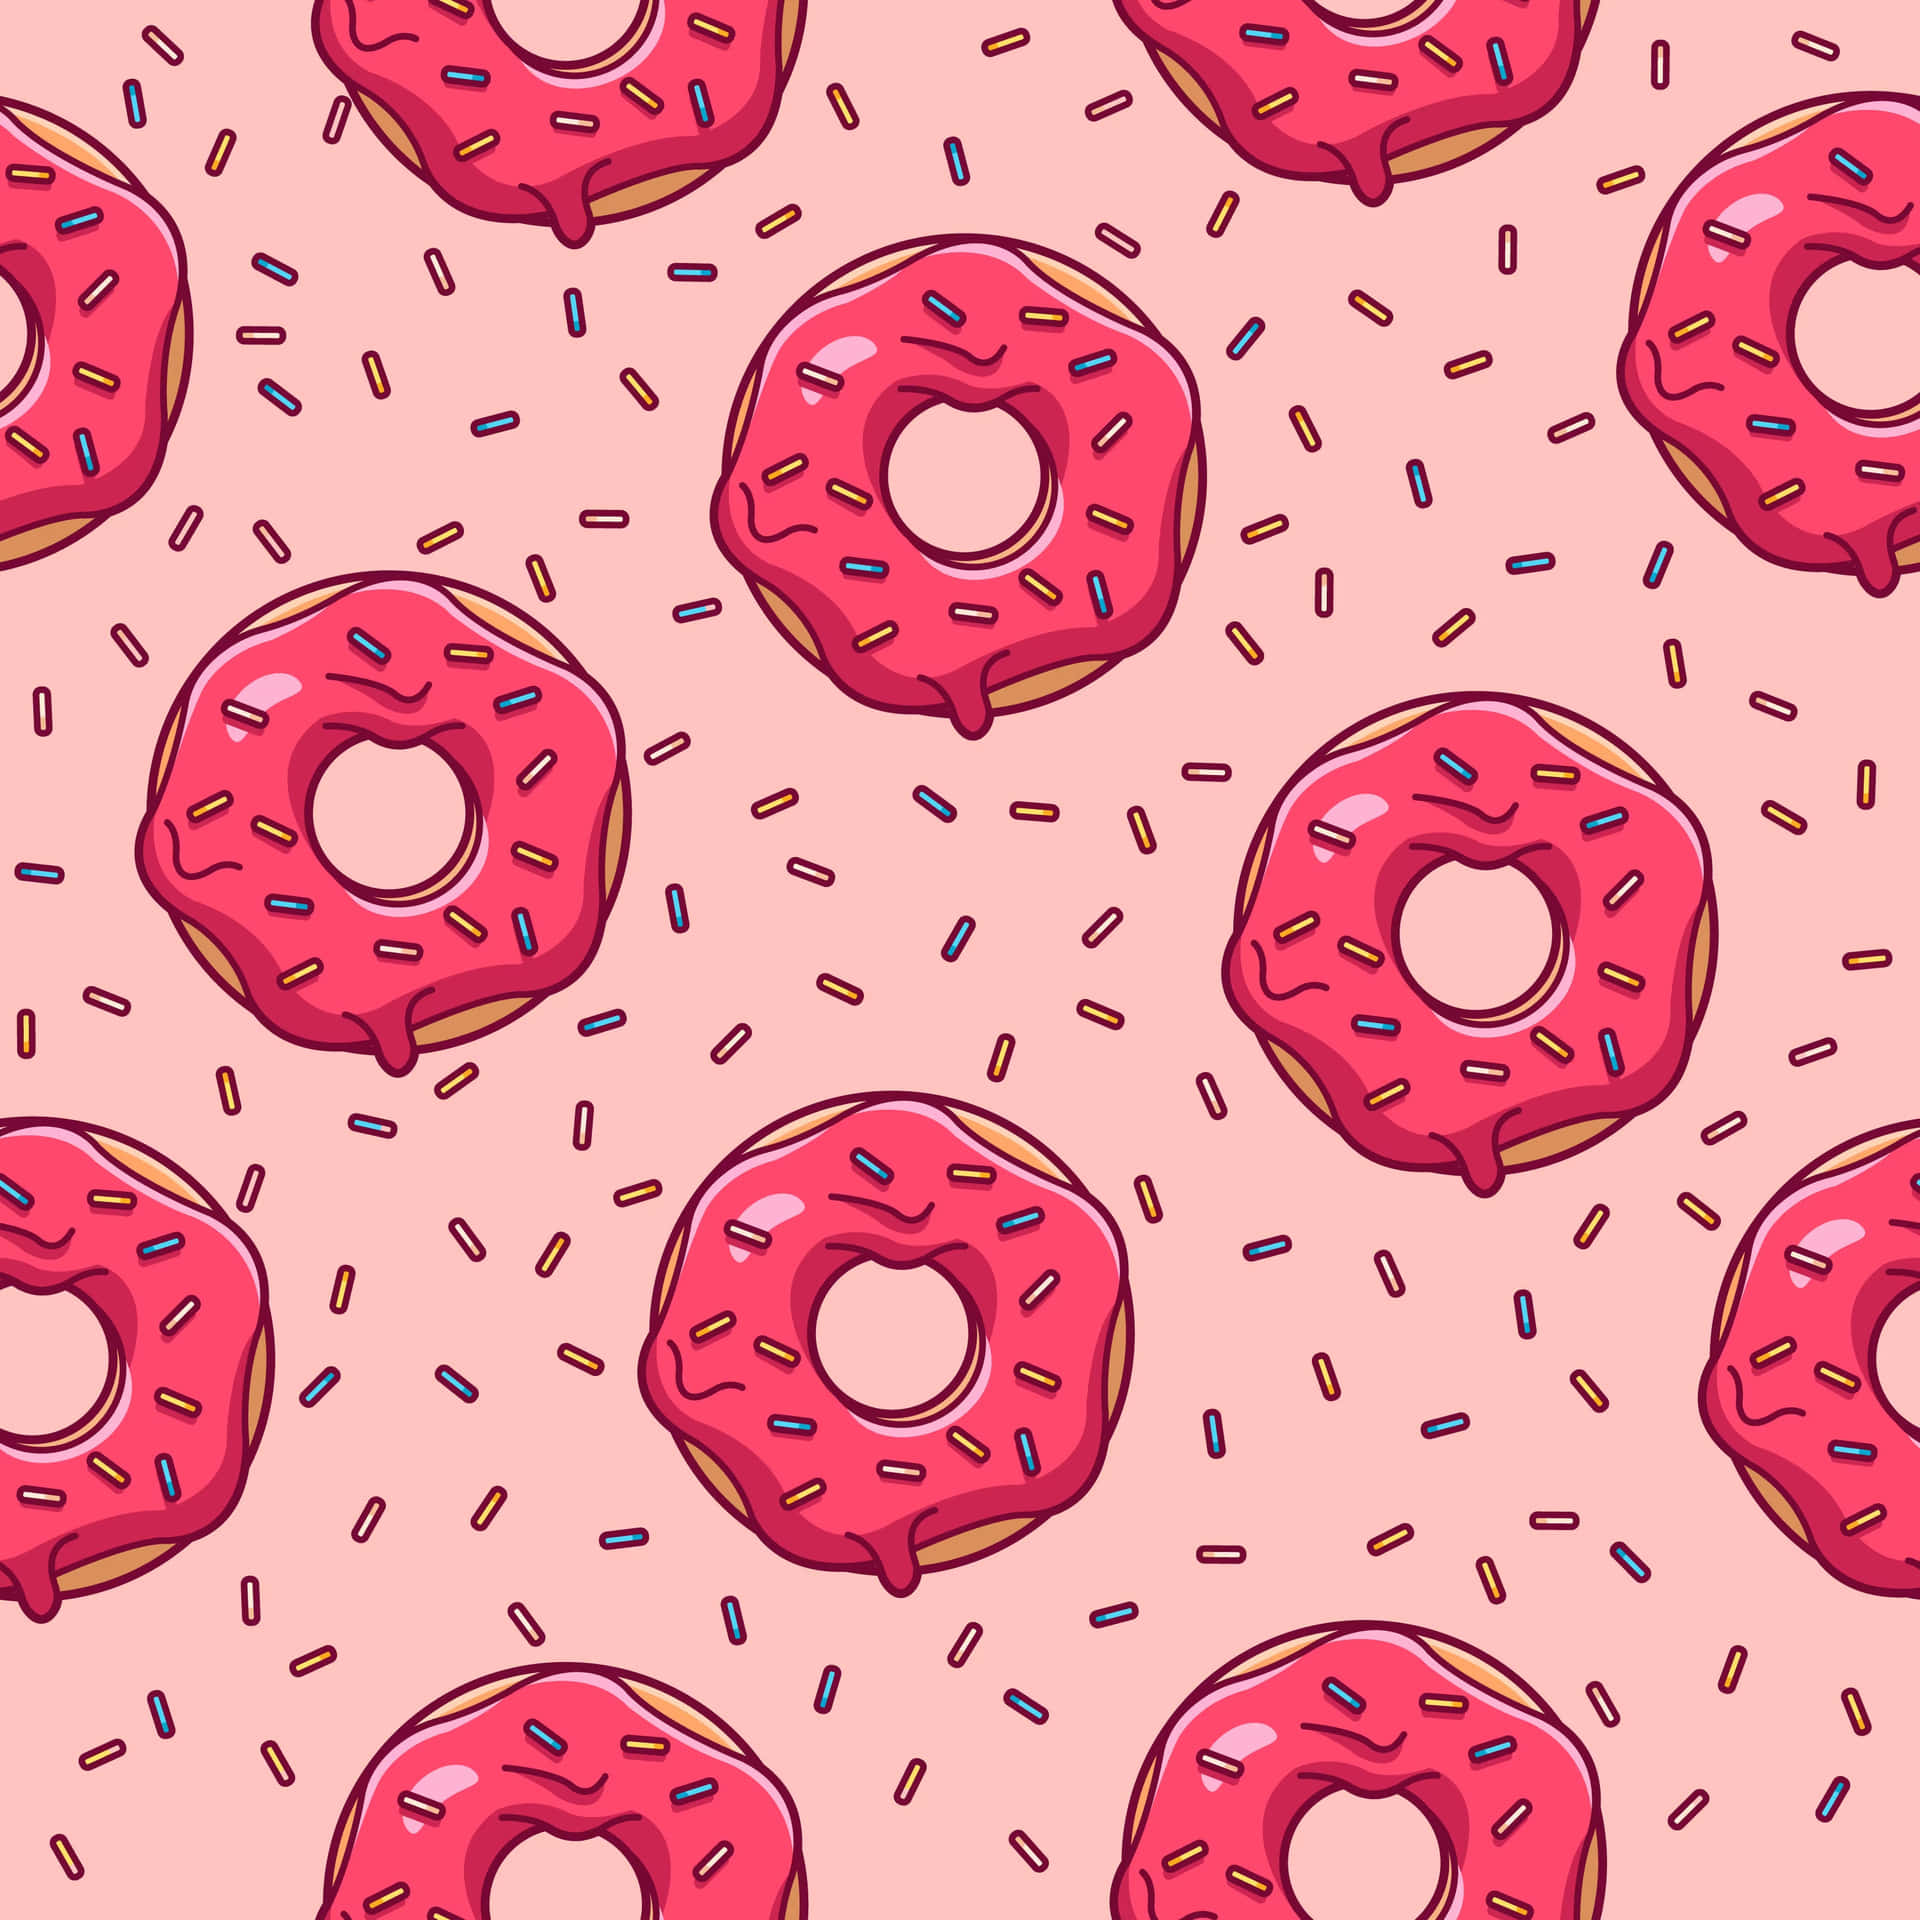 Adorable and Delicious Glazed Donut Wallpaper